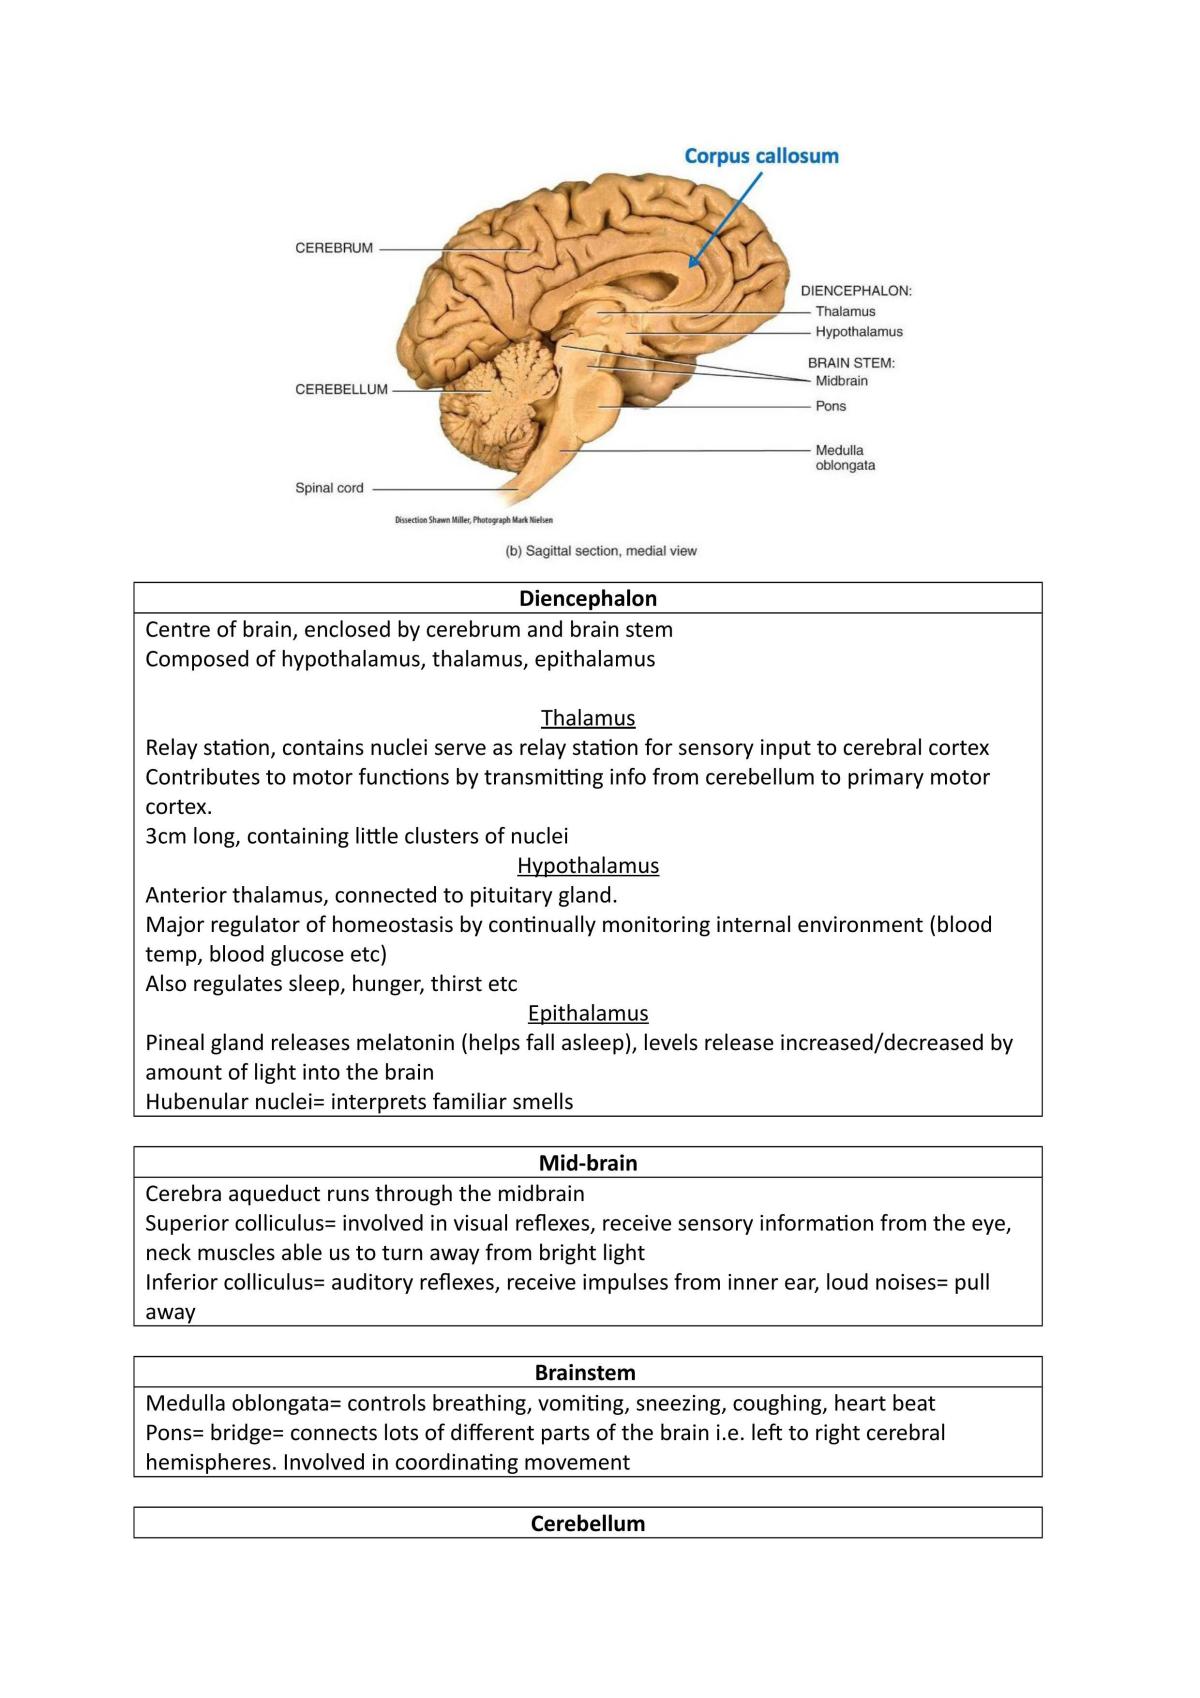 Regional Anatomy and Physiology Study Guide - Page 27